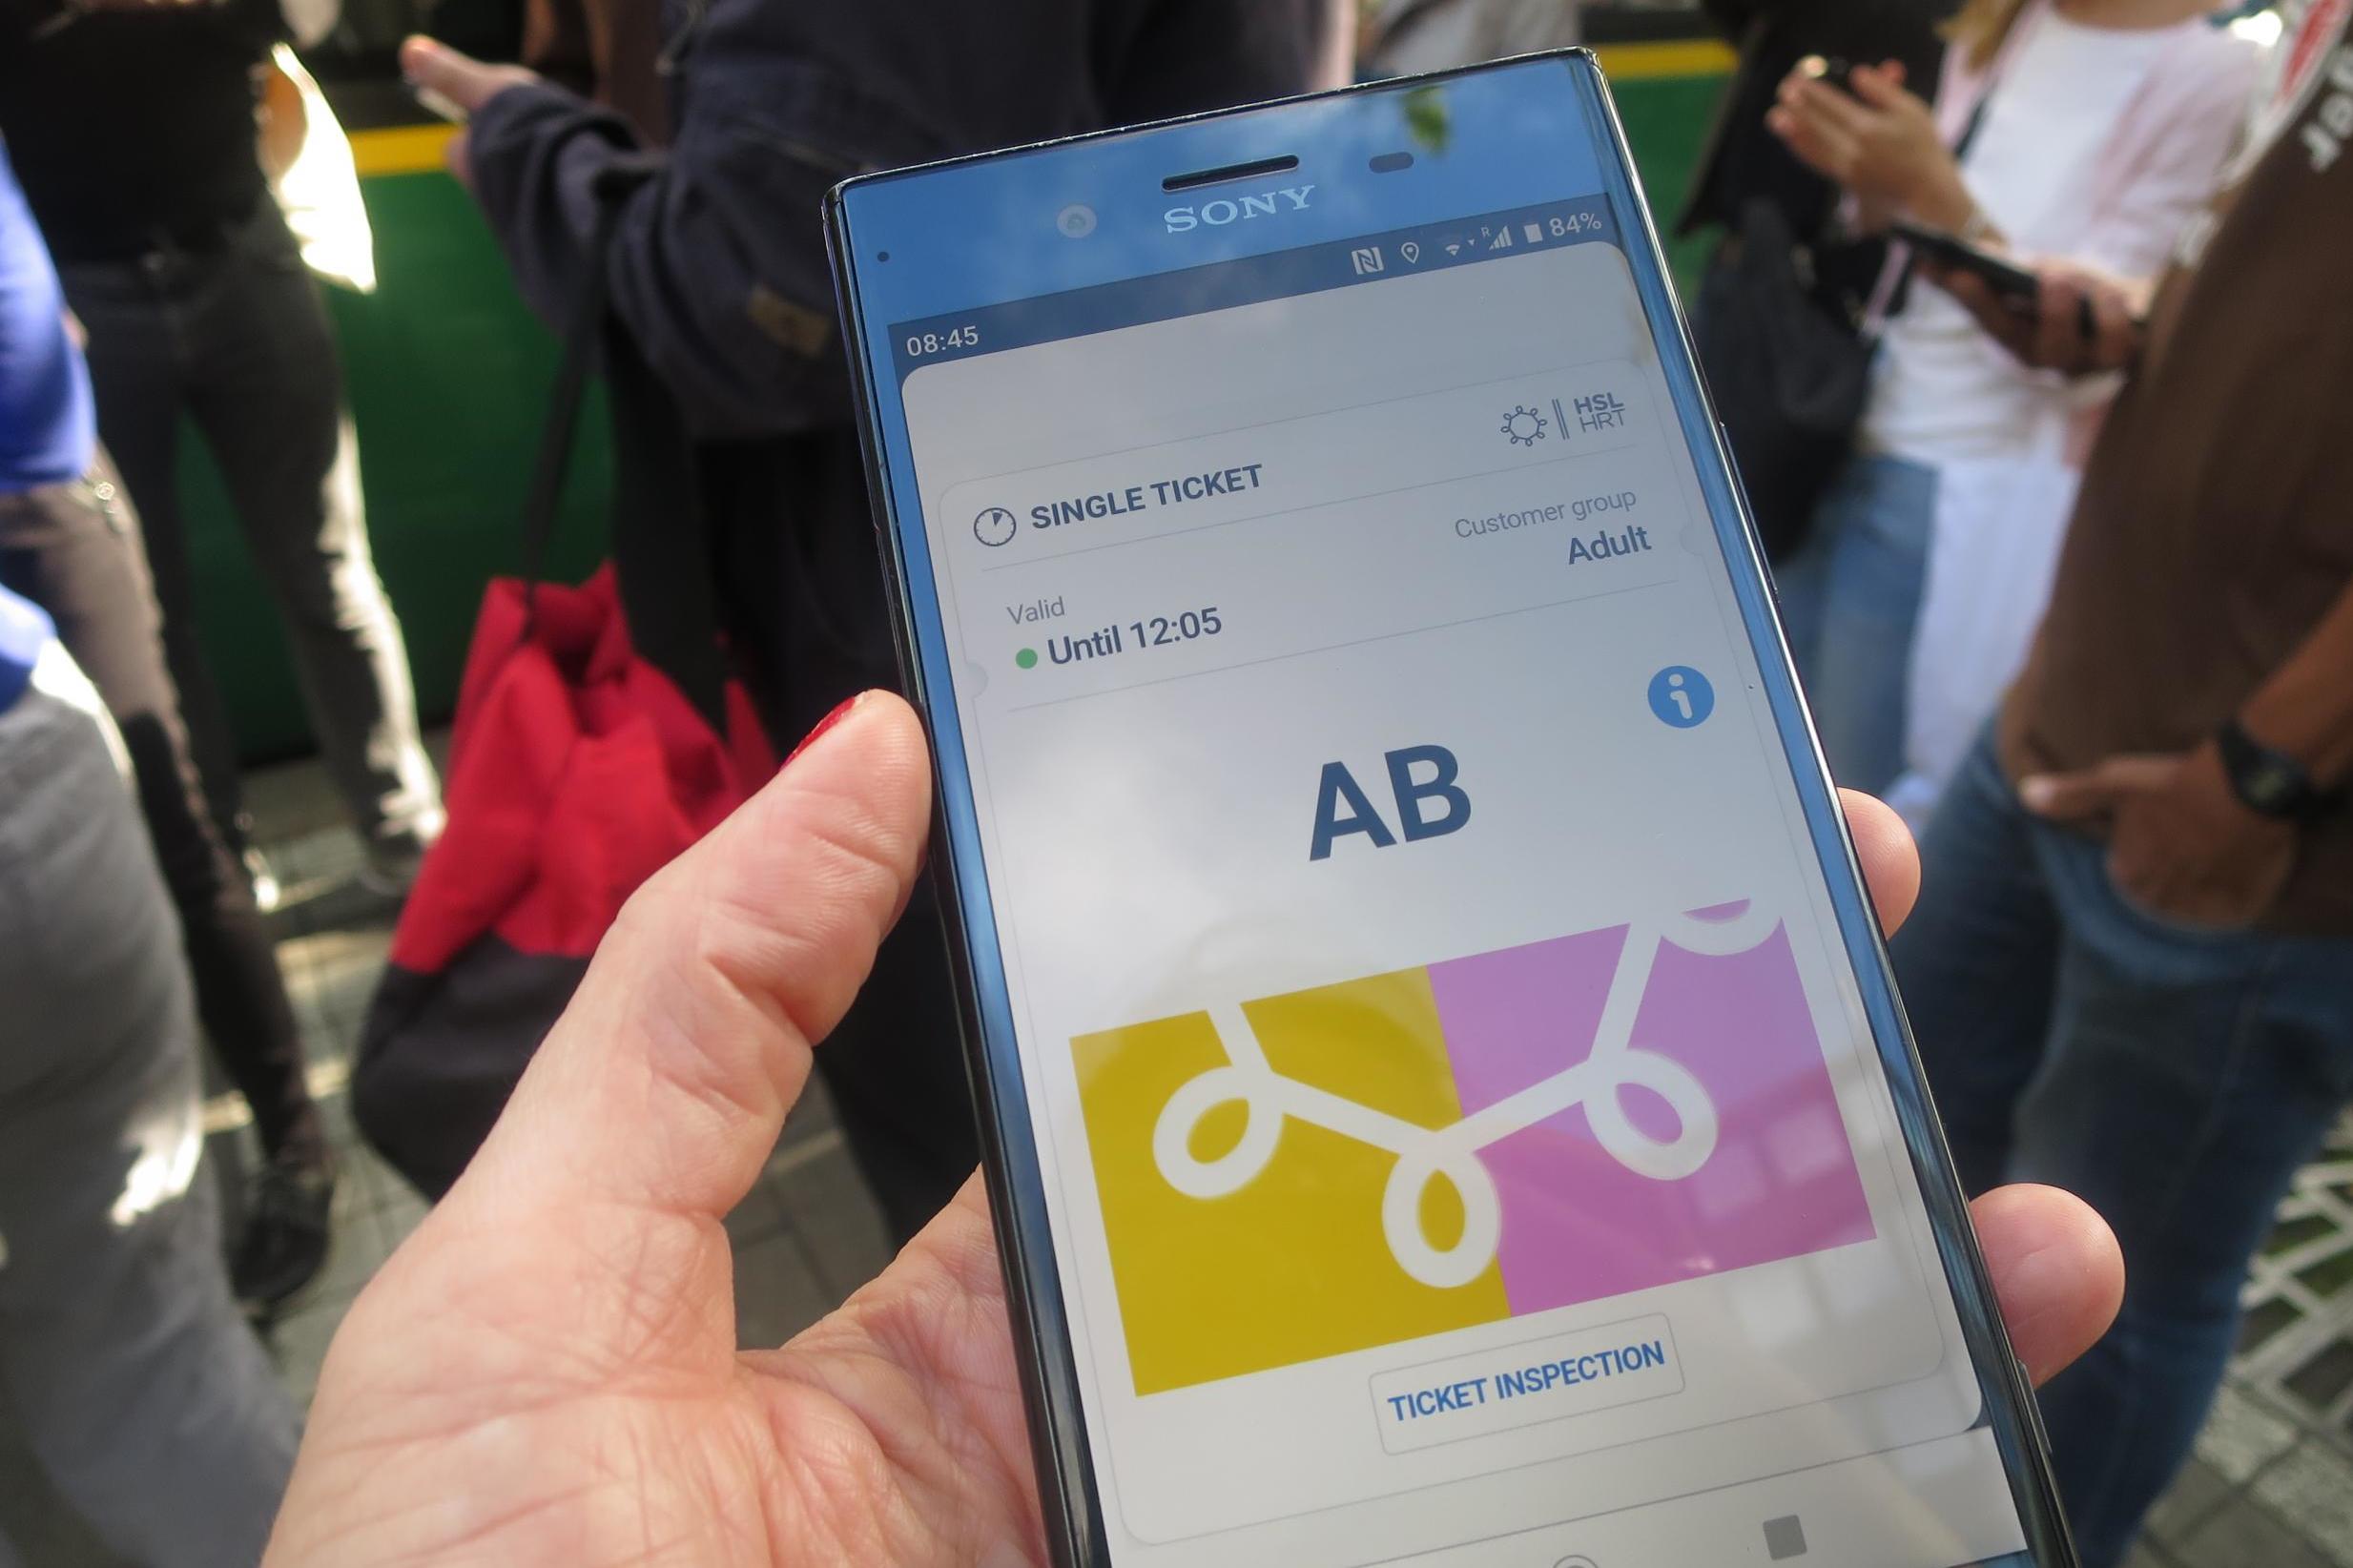 Helsinki is being shaped by new technology, like transport app Whim